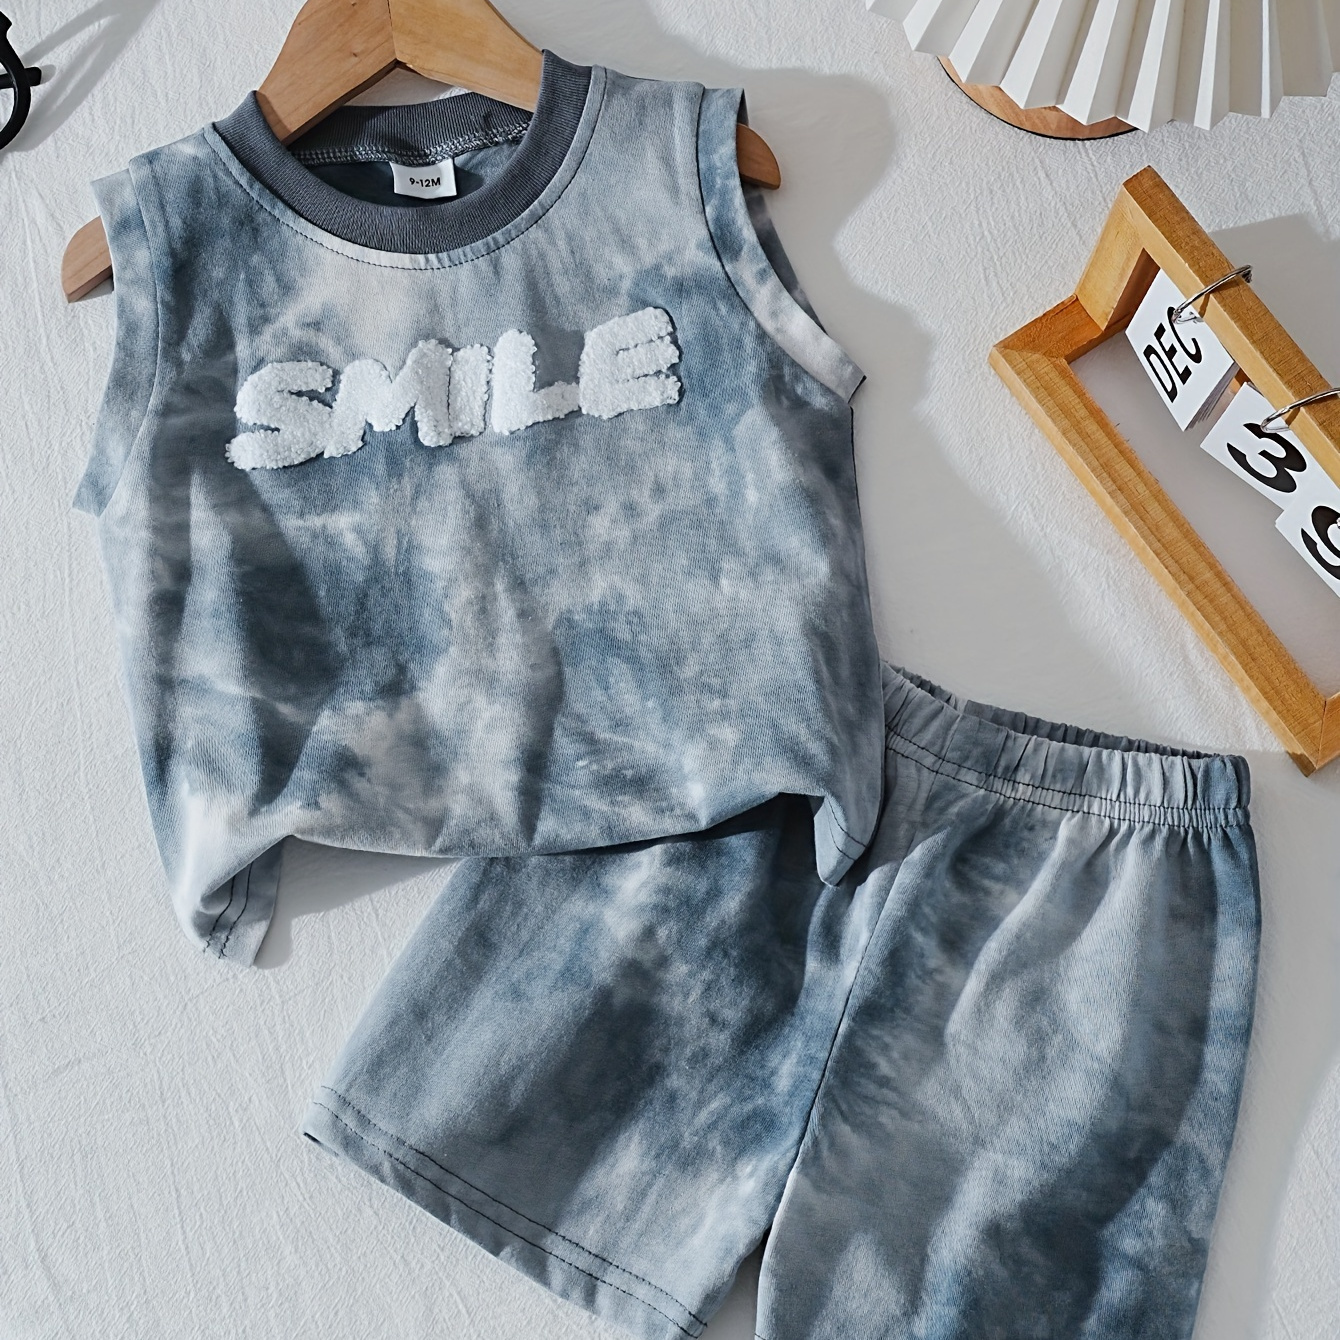 

Baby Boys 100% Cotton Tie Dye Outfit, Smile Embroidery Tank Top & Shorts Set, 2pcs Toddlers Kids Summer Clothing